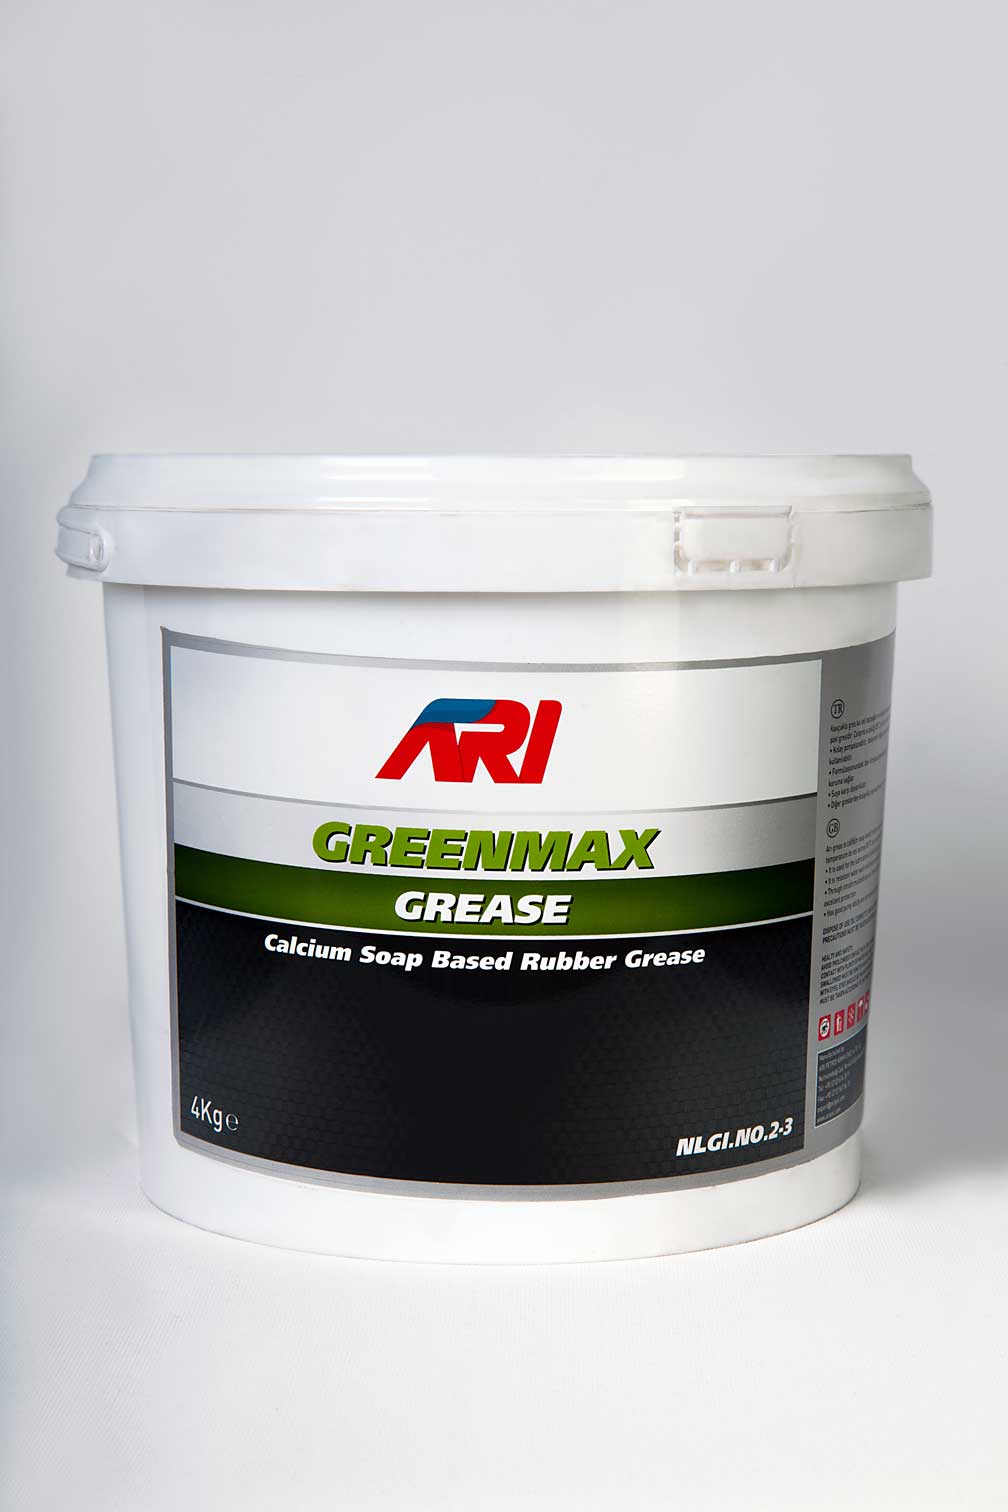 Greenmax Grease